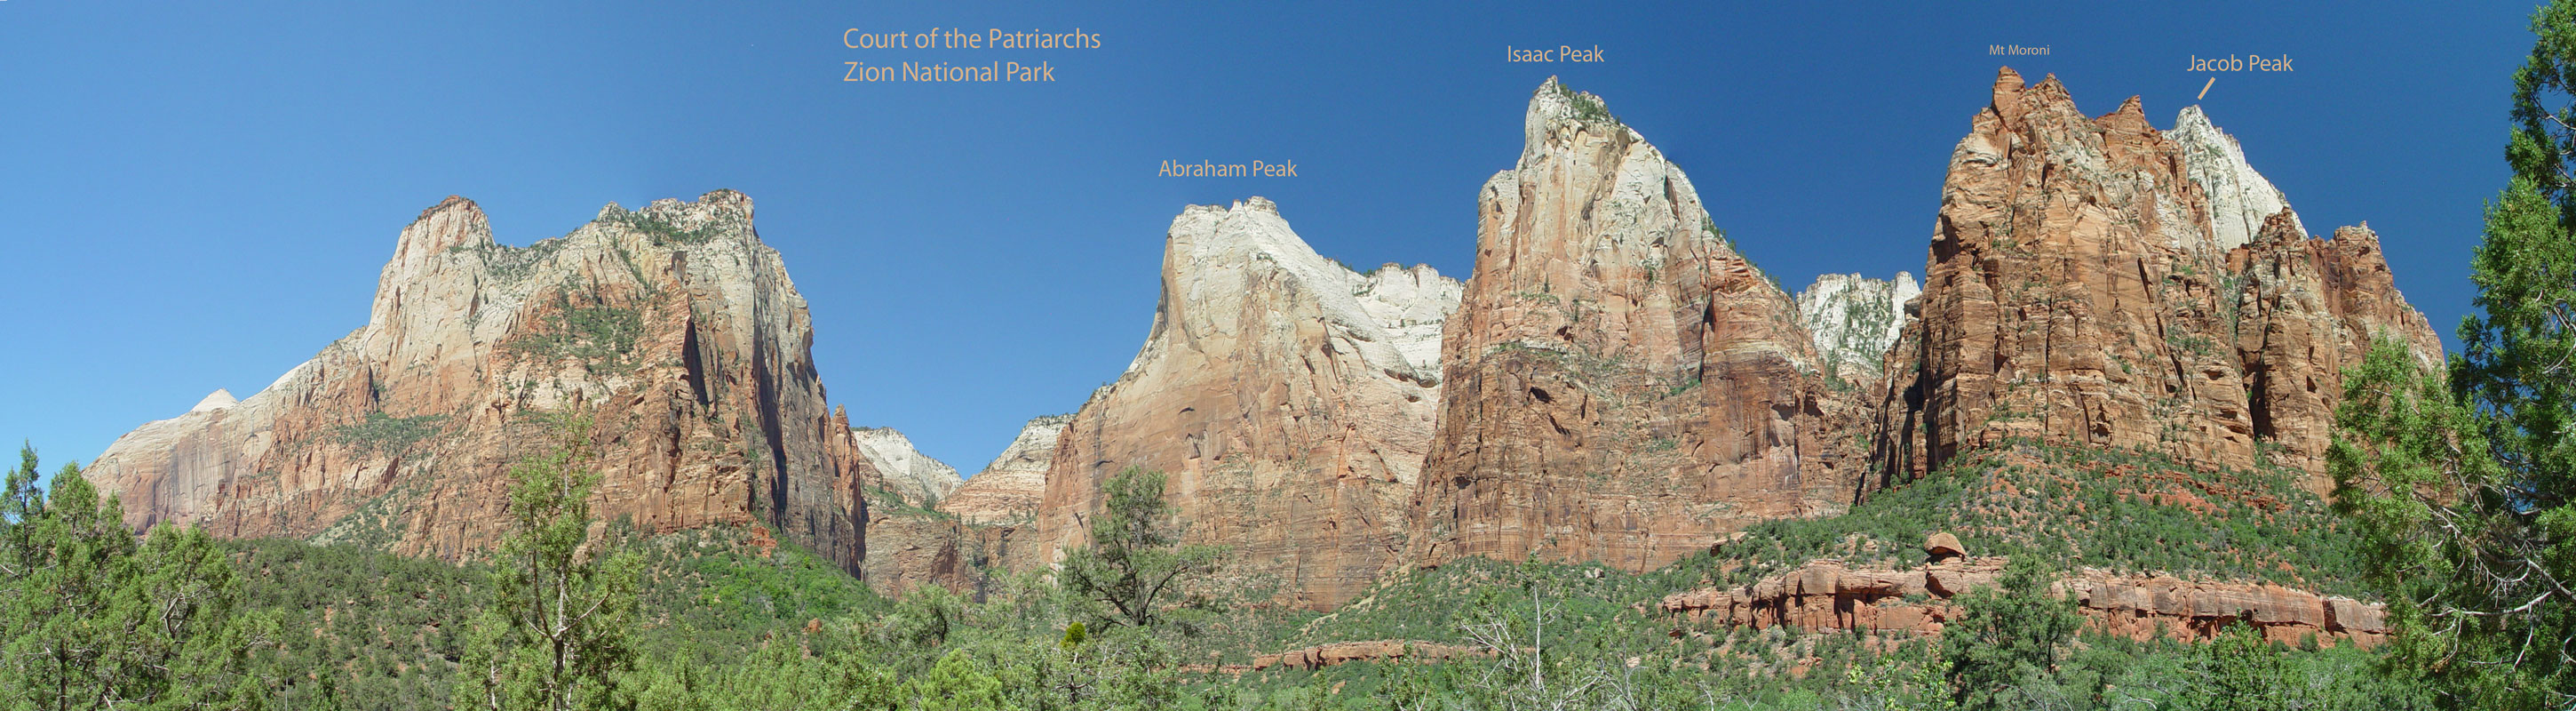 Court of the Patriarchs at Zion